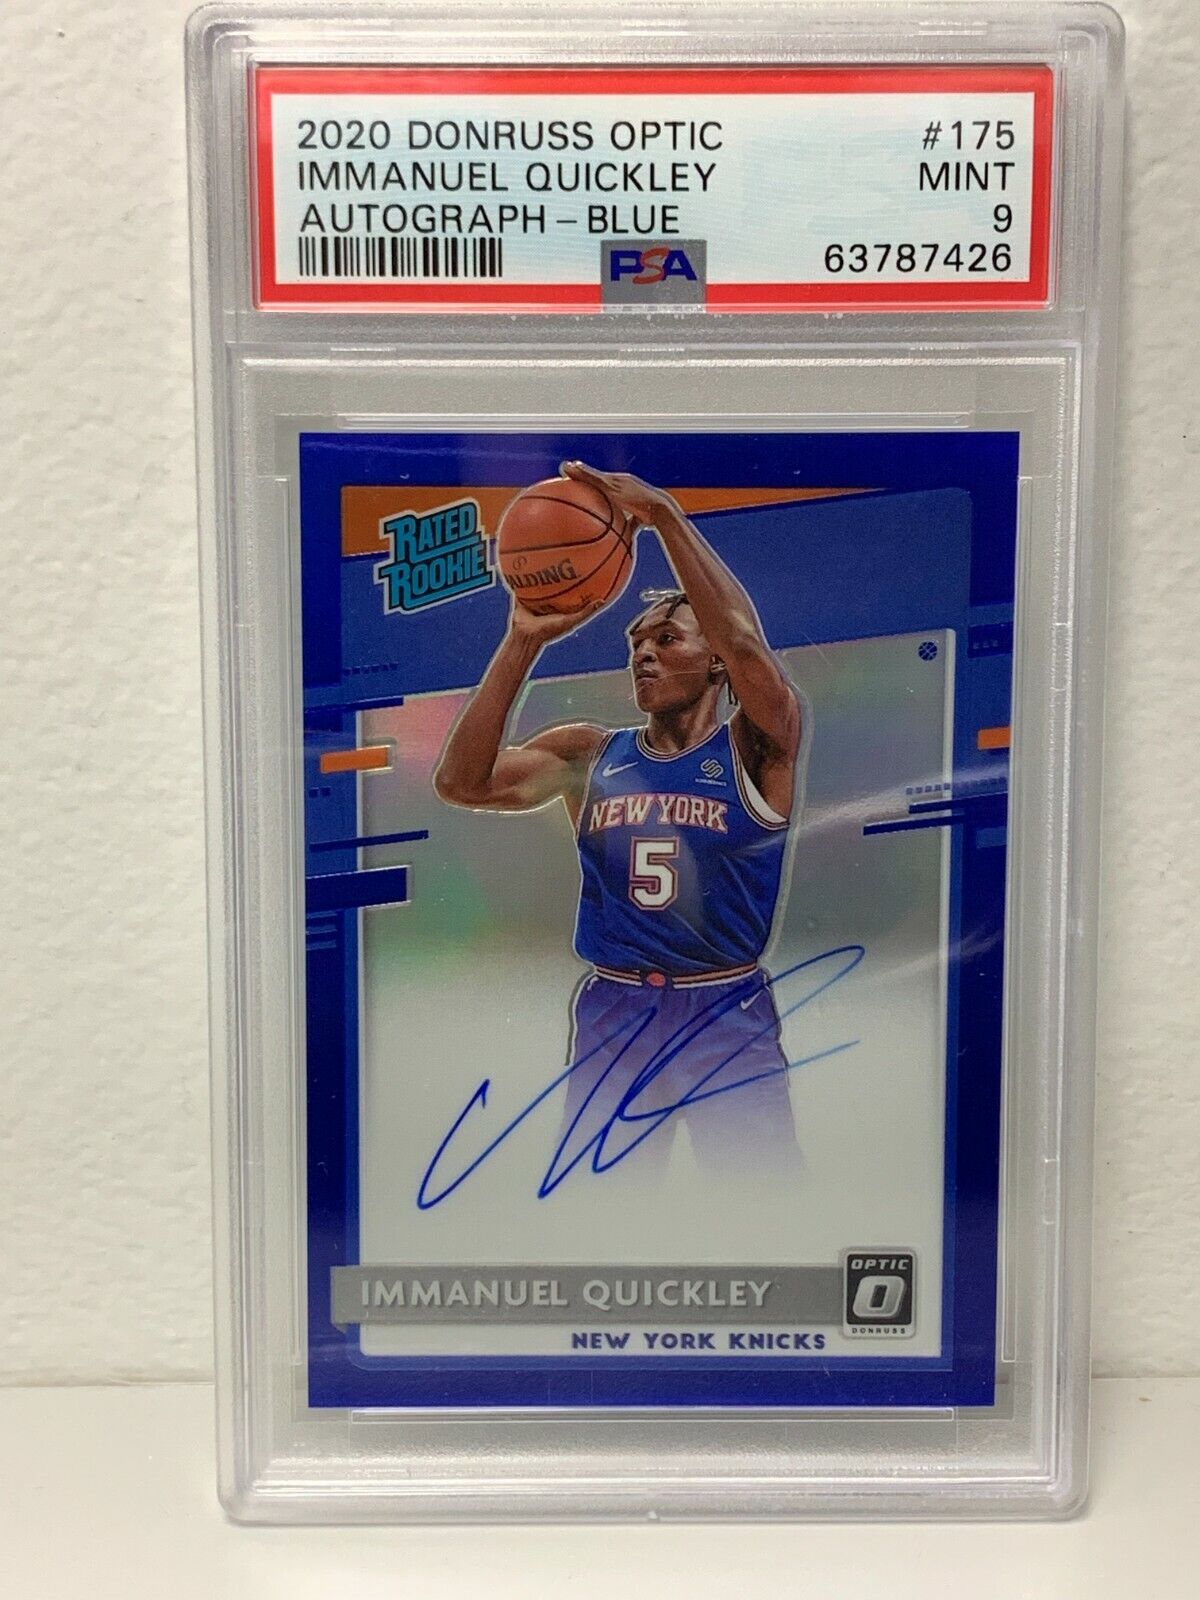 Immanuel Quickley Donruss Optic Rated Rookie Auto Blue /49 PSA 9